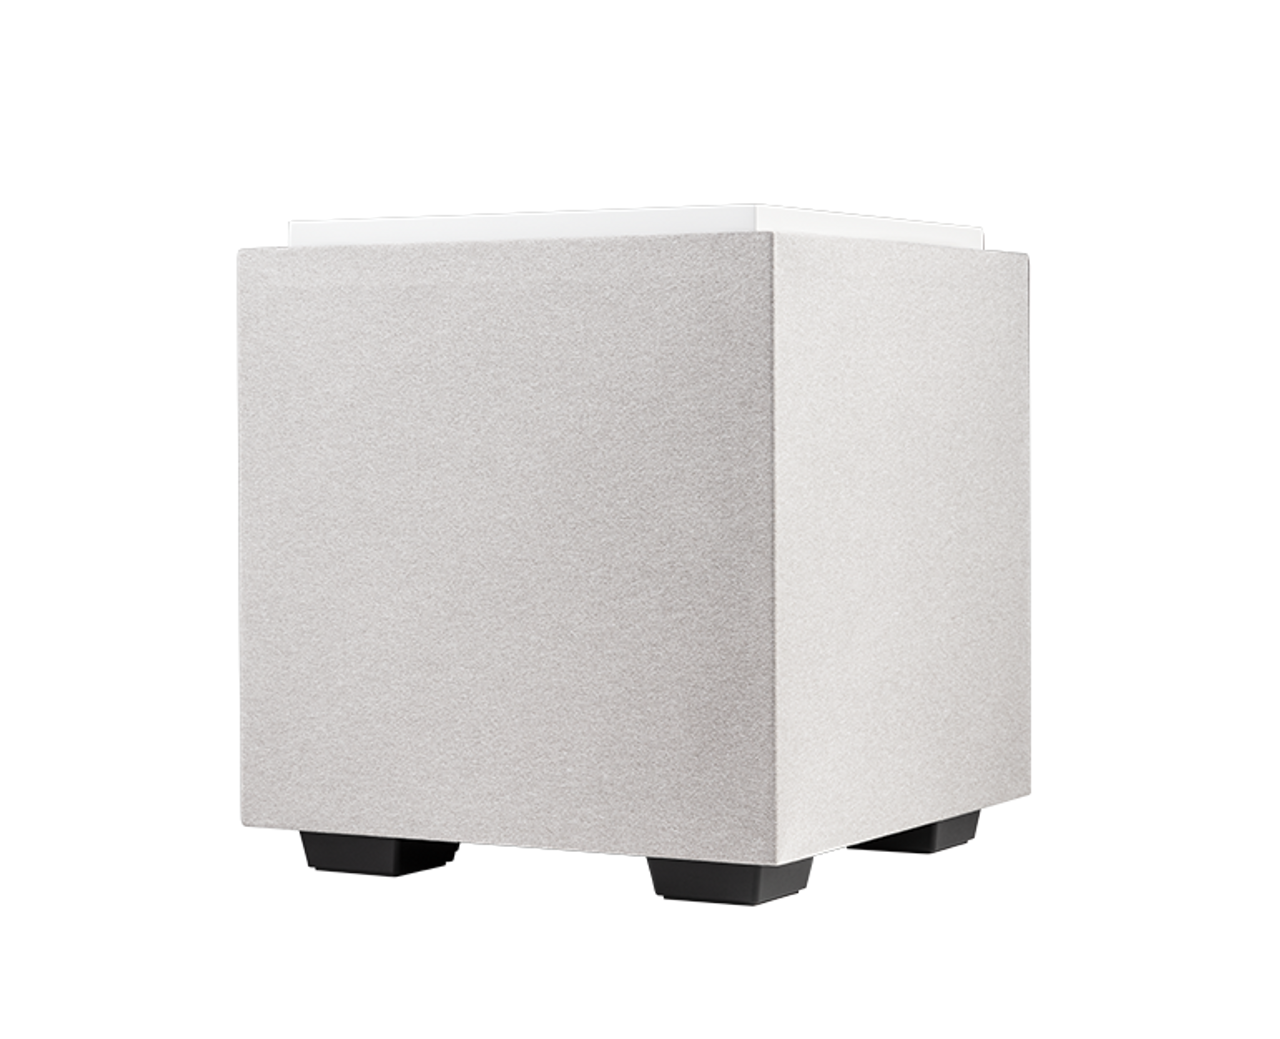 Definitive Technology DN8 8" 500W Ultra-Performance Powered Subwoofer with Dual 8" Bass Radiators